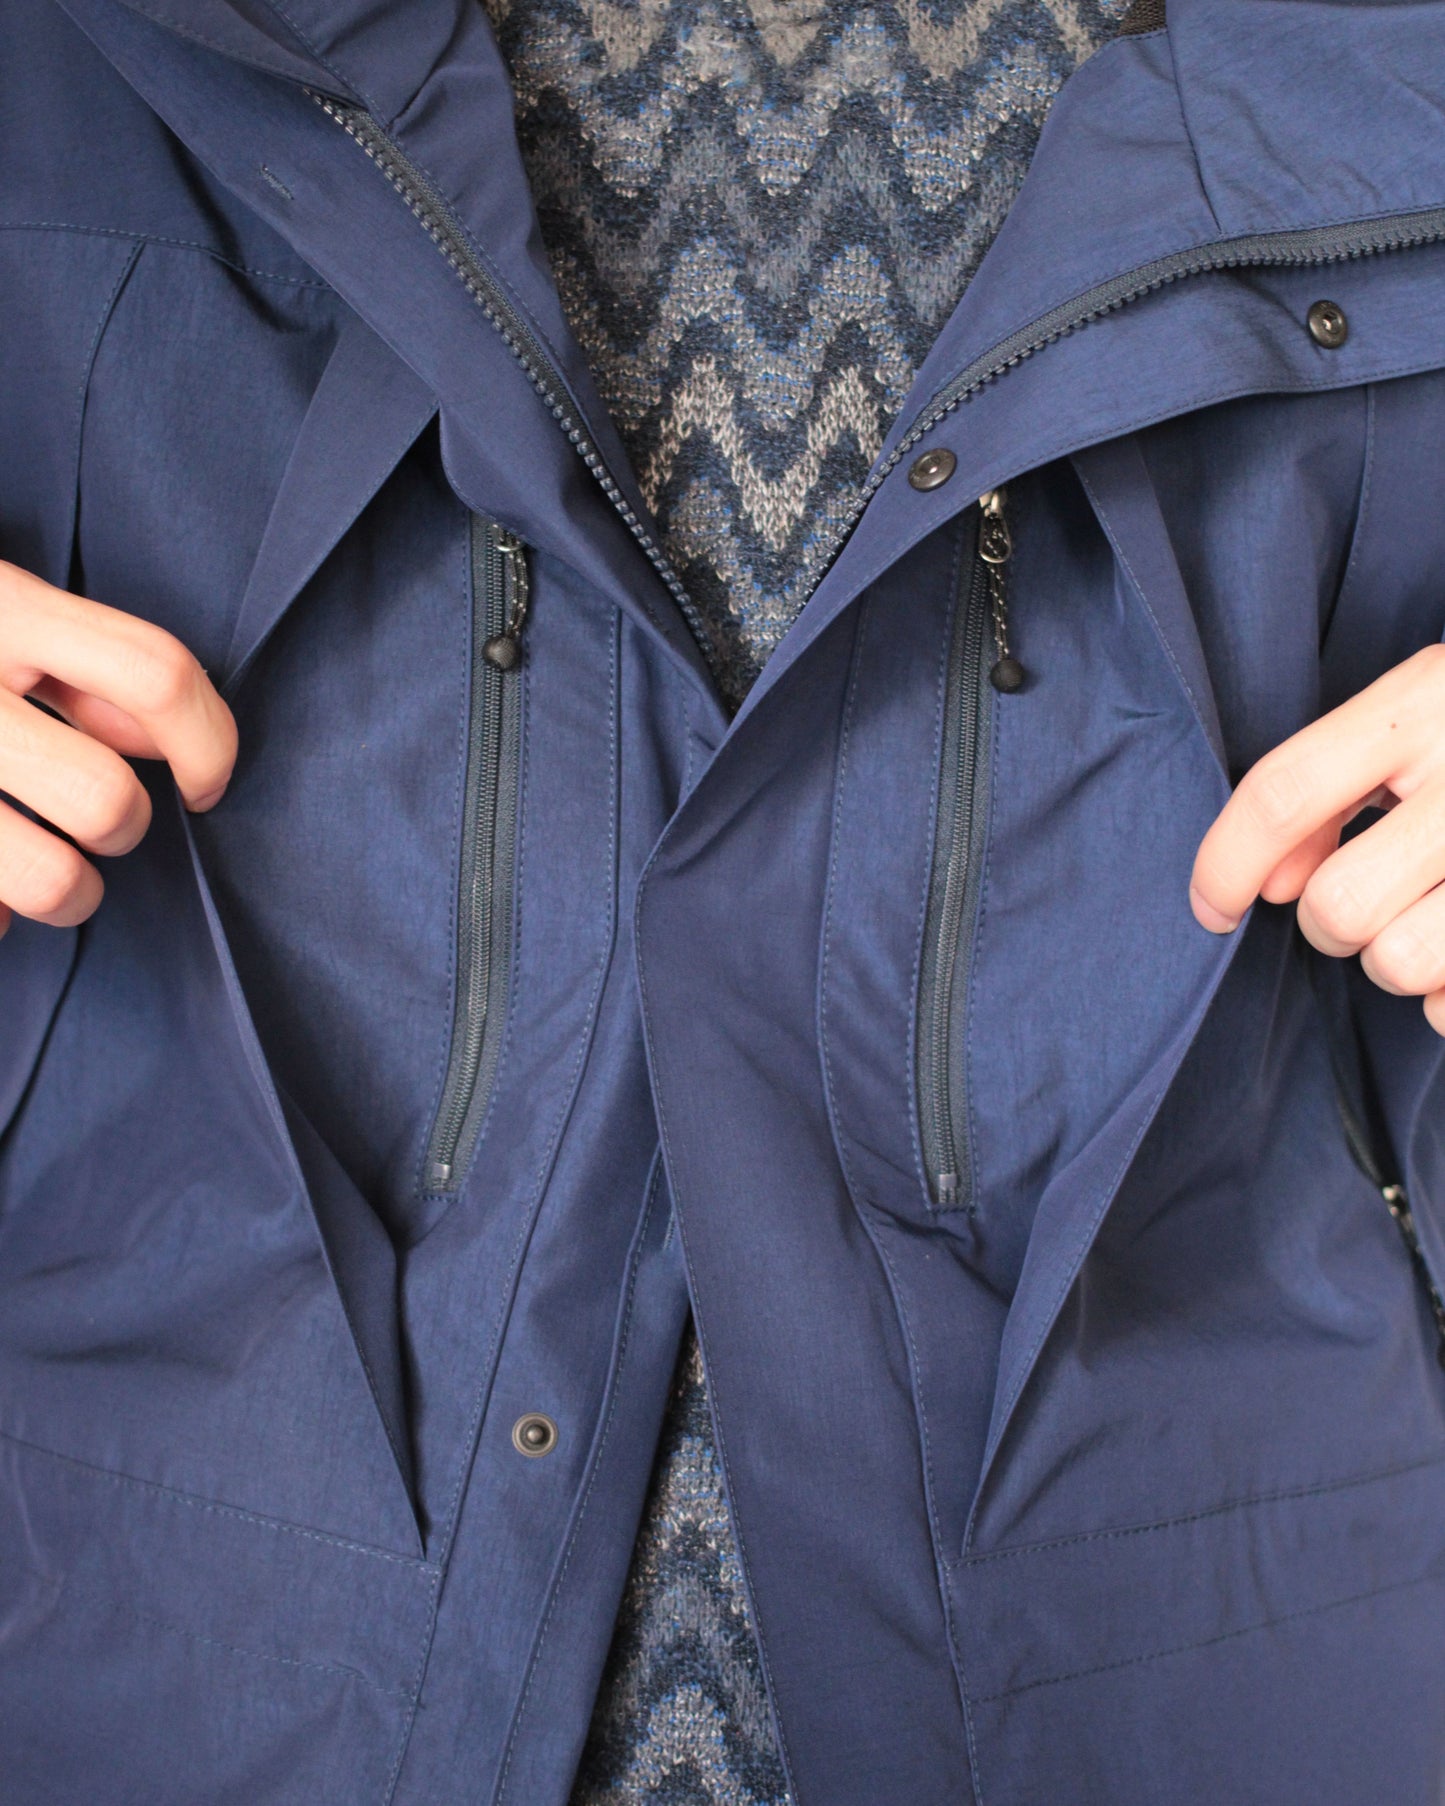 ENDS and MEANS/MOUNTAIN PARKA "Deep Sea"